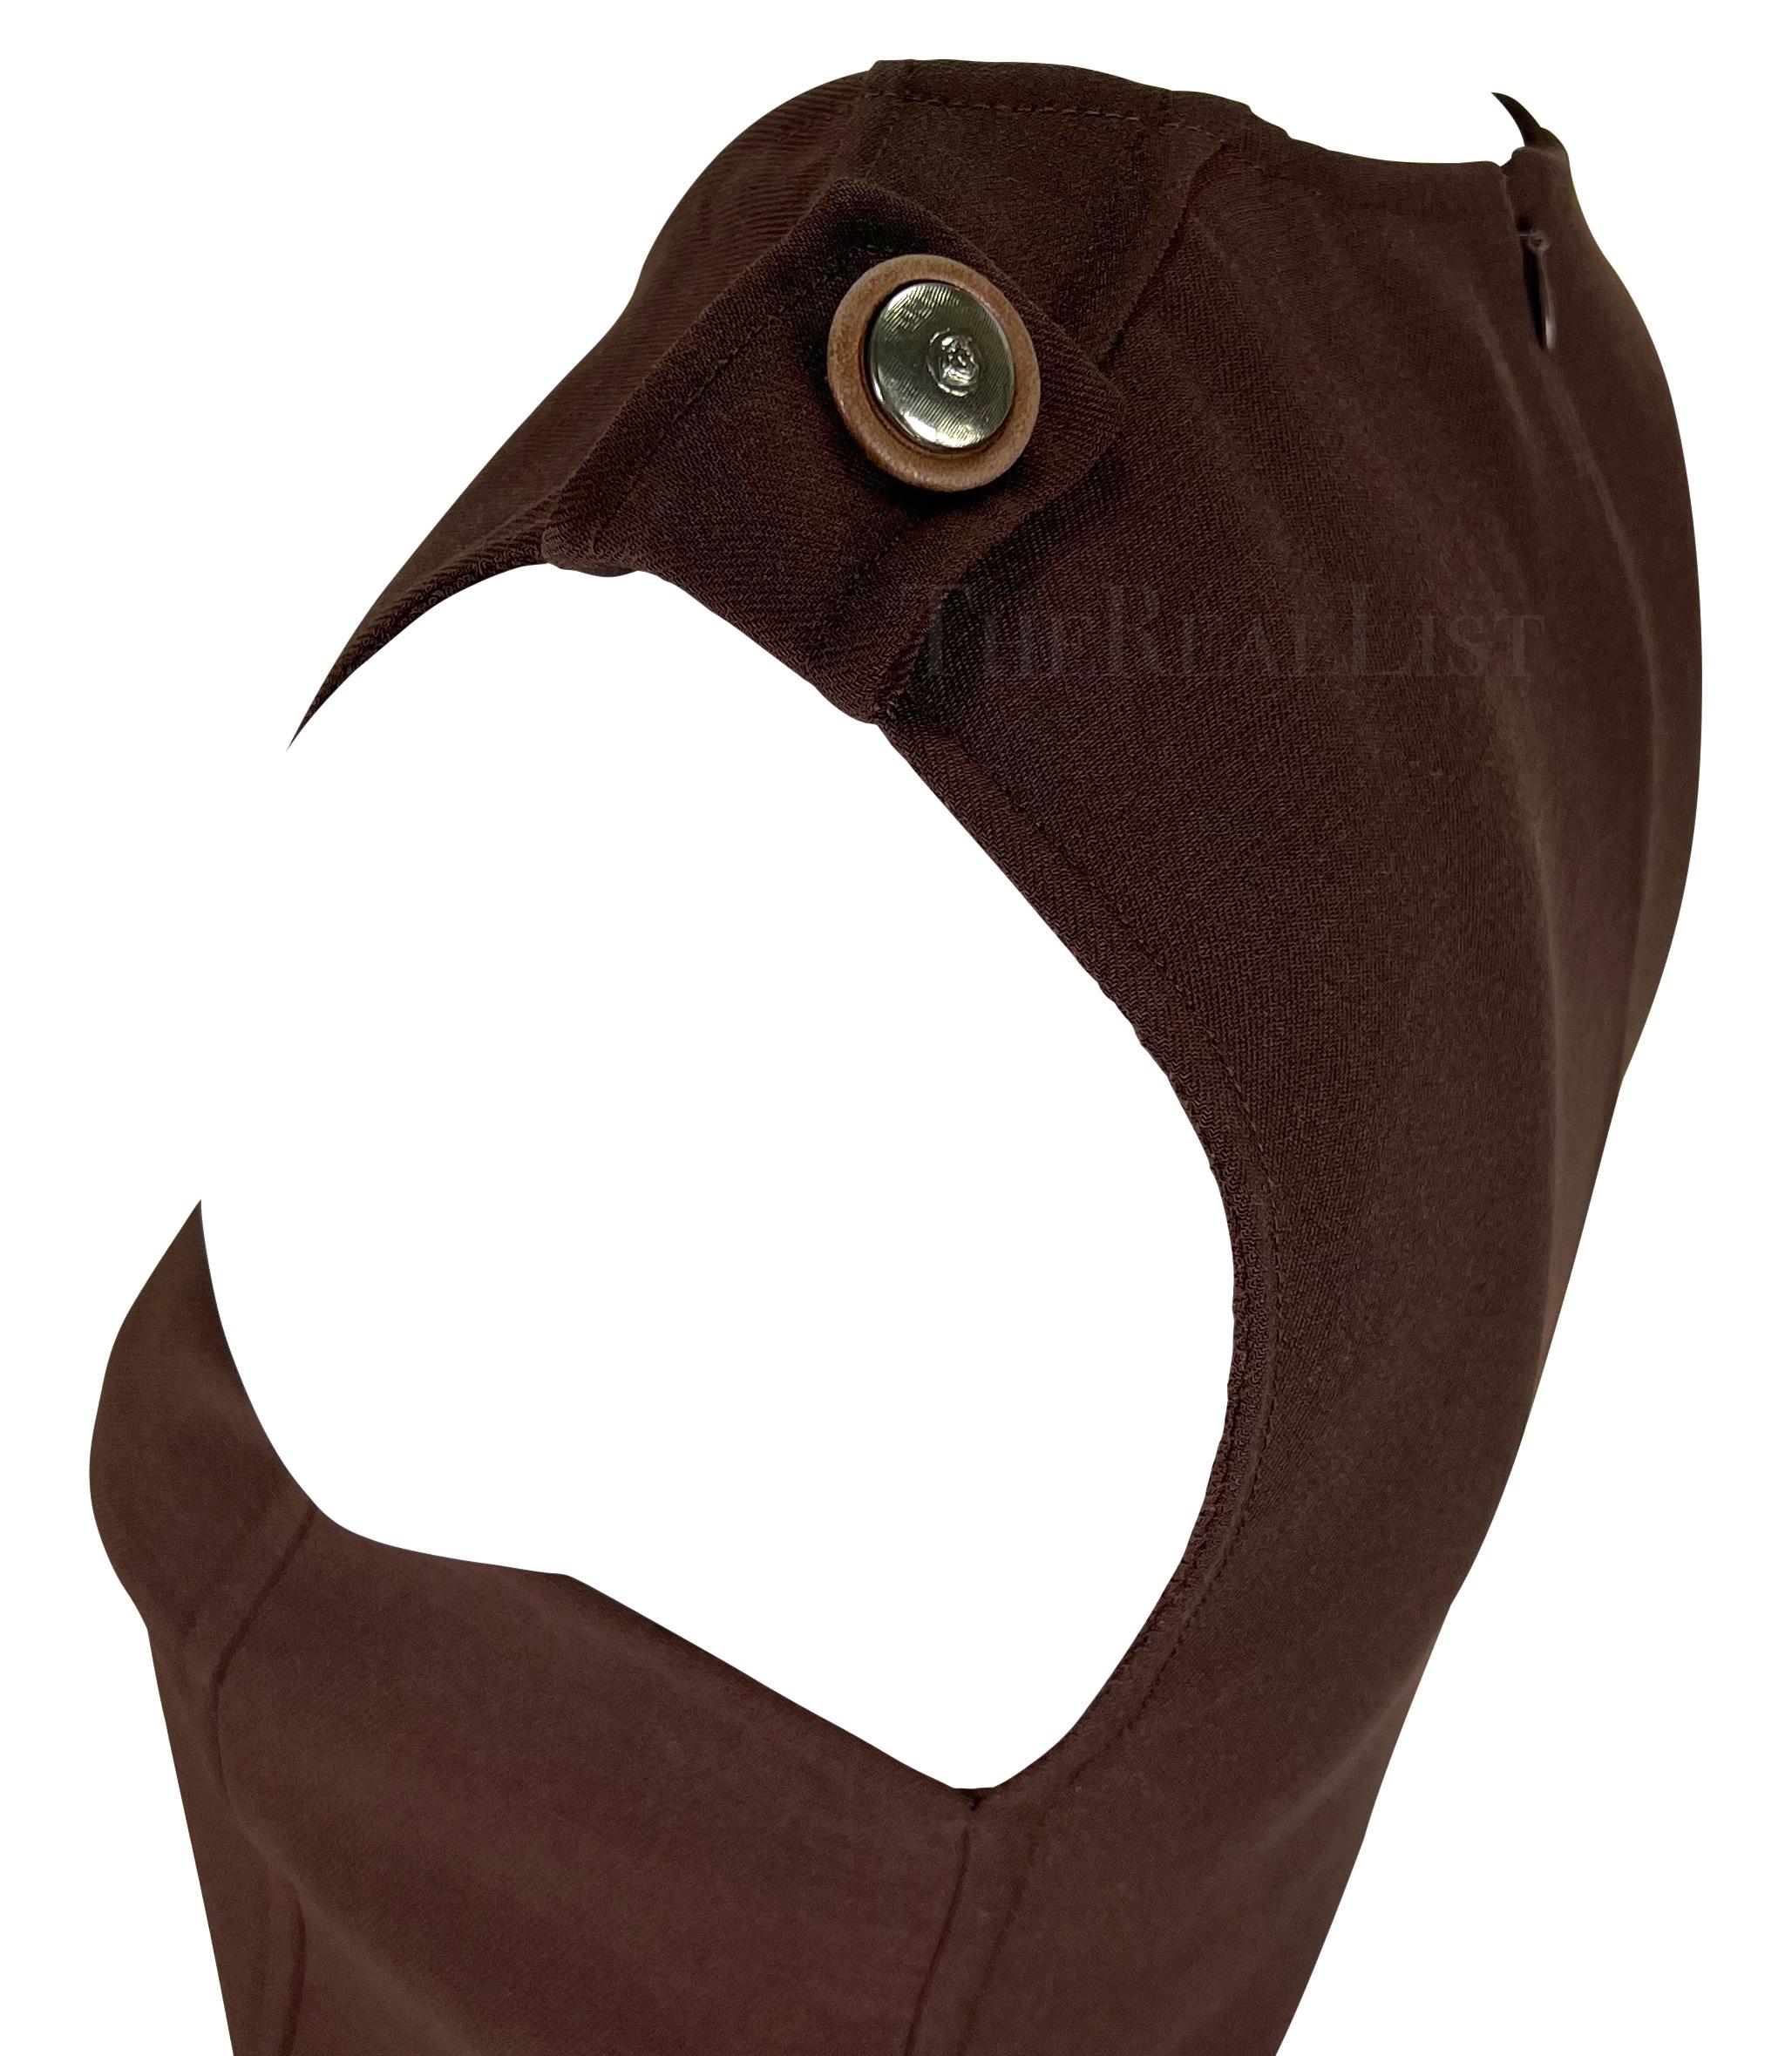 F/W 1996 Gianni Versace Couture Brown Medusa Epaulette Sleeveless Dress In Excellent Condition For Sale In West Hollywood, CA